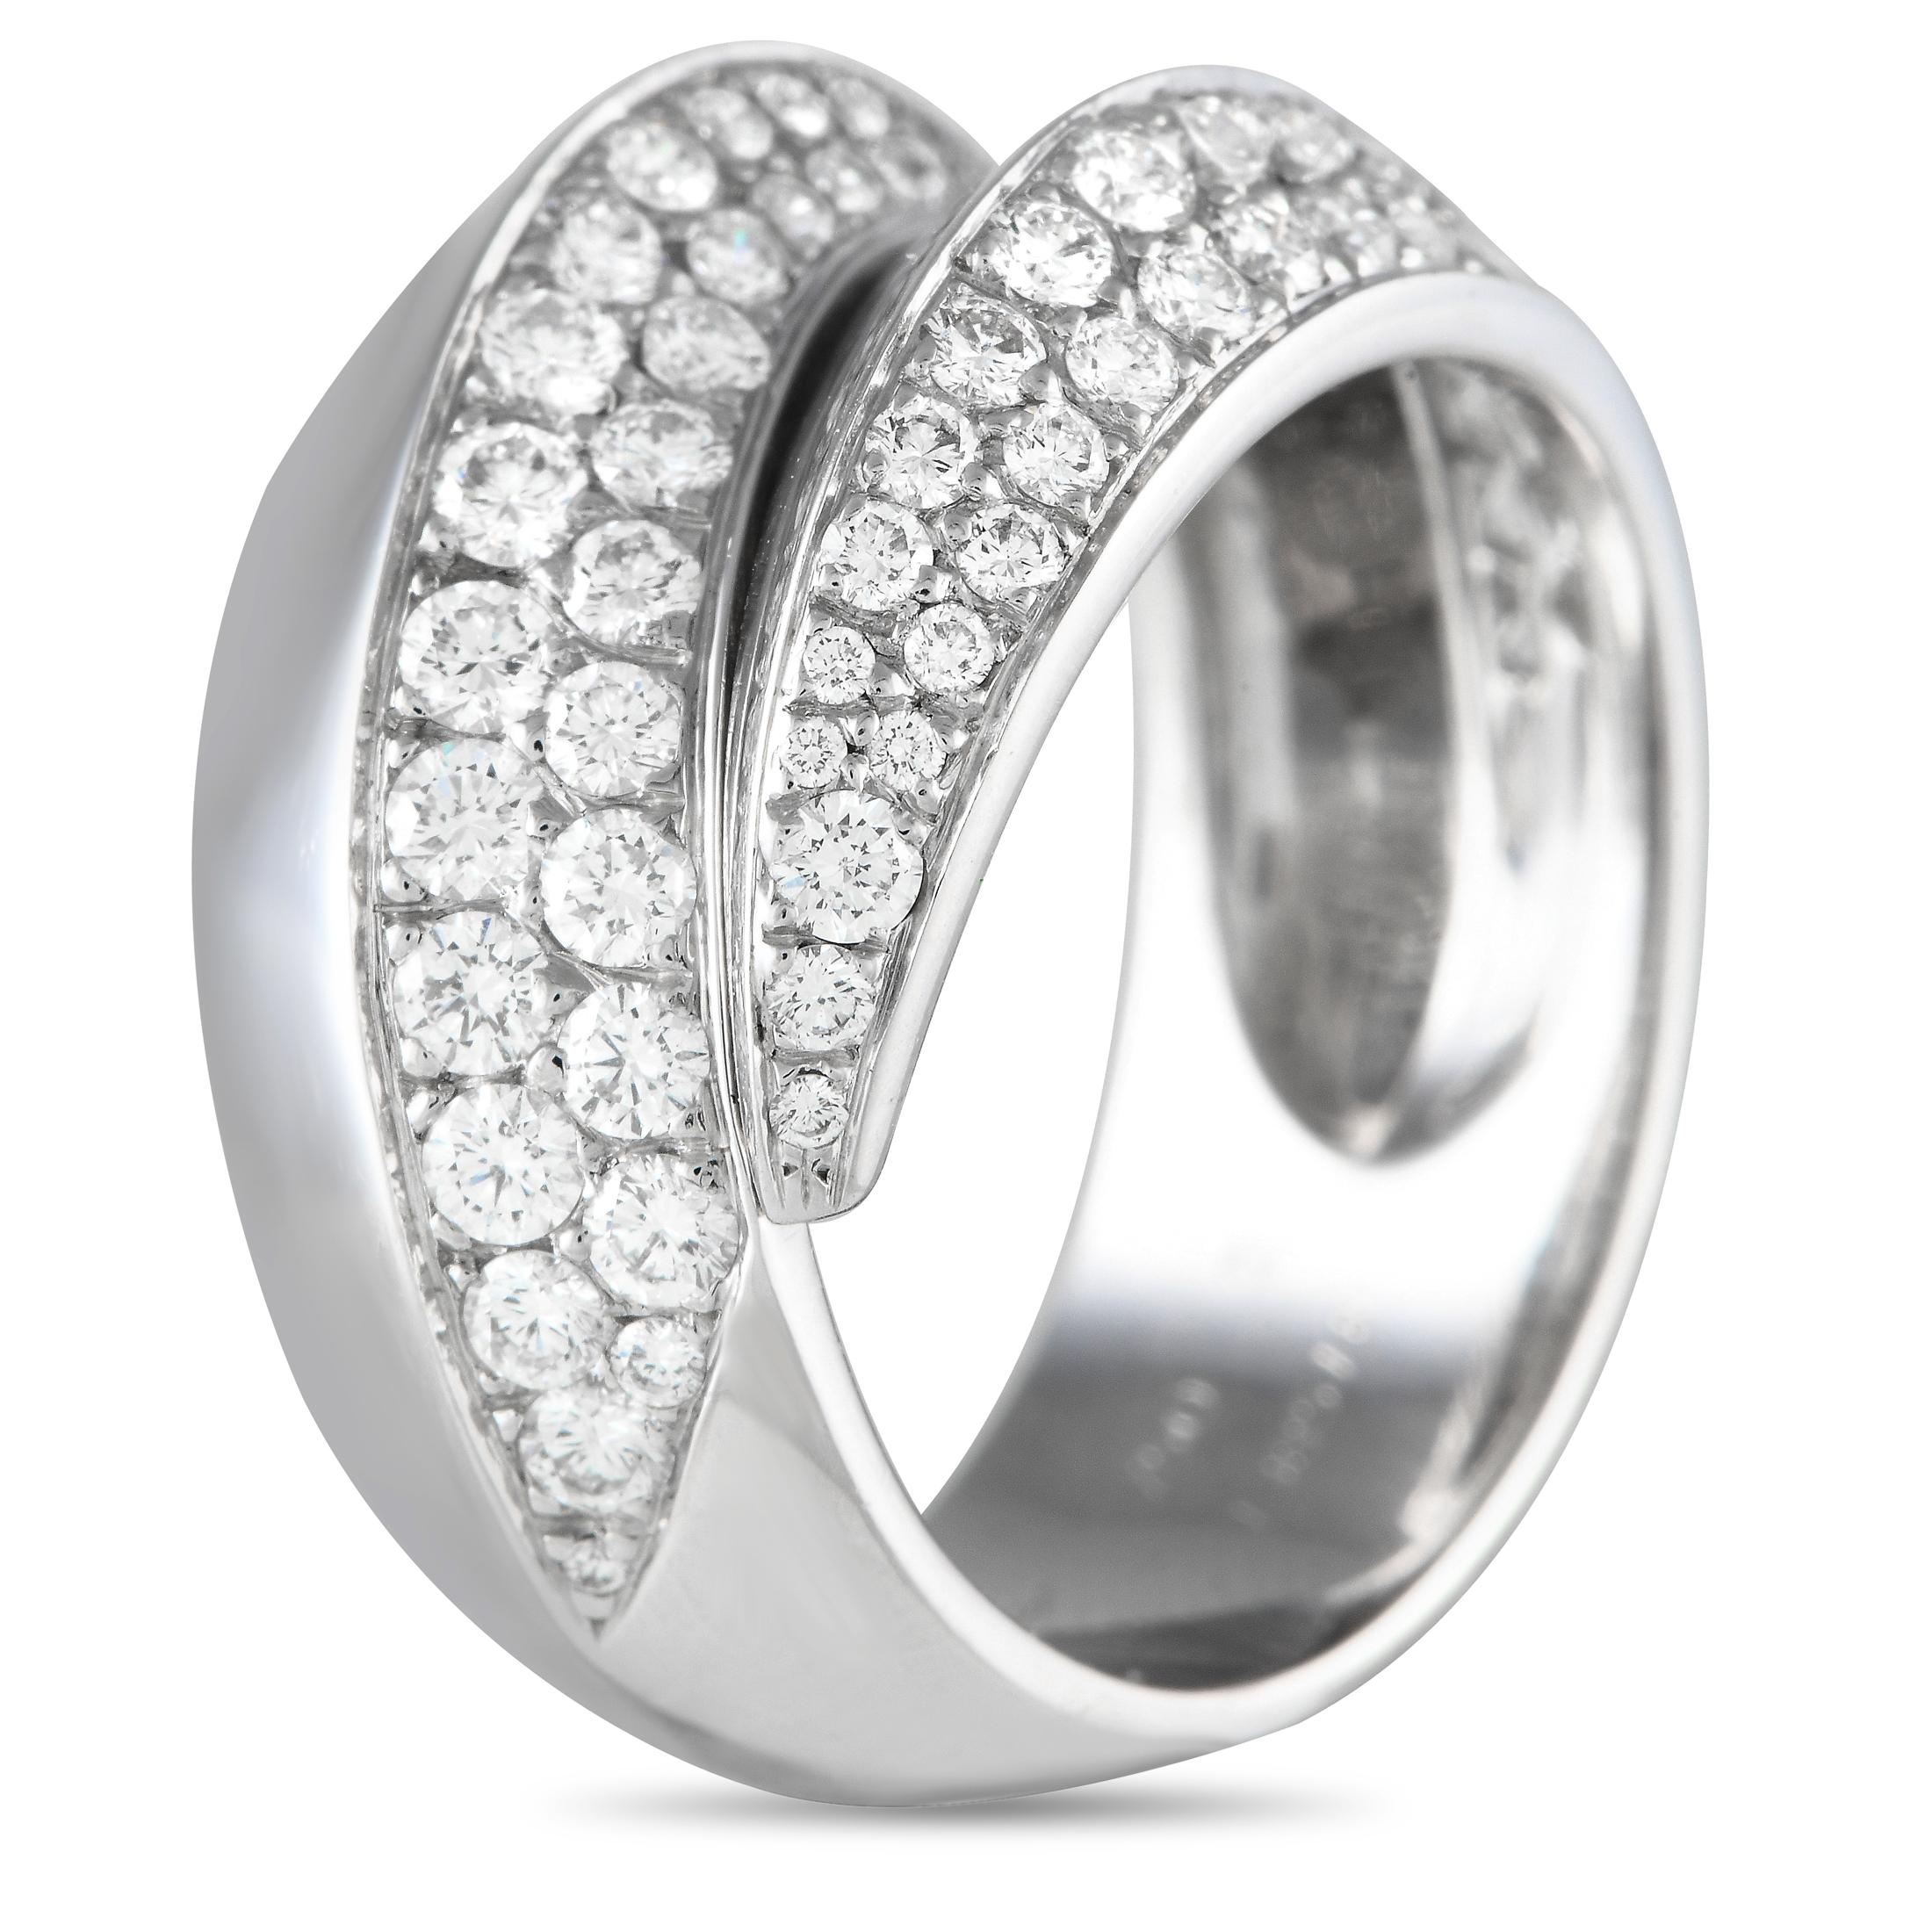 A sleek 18K White Gold wrapped setting makes this Cartier Panthère Griffe the perfect addition to any luxury jewelry collection. Covered in pave-set Diamonds totaling 1.15 carats, this elegant accessory measures 8mm wide and features a 5mm top